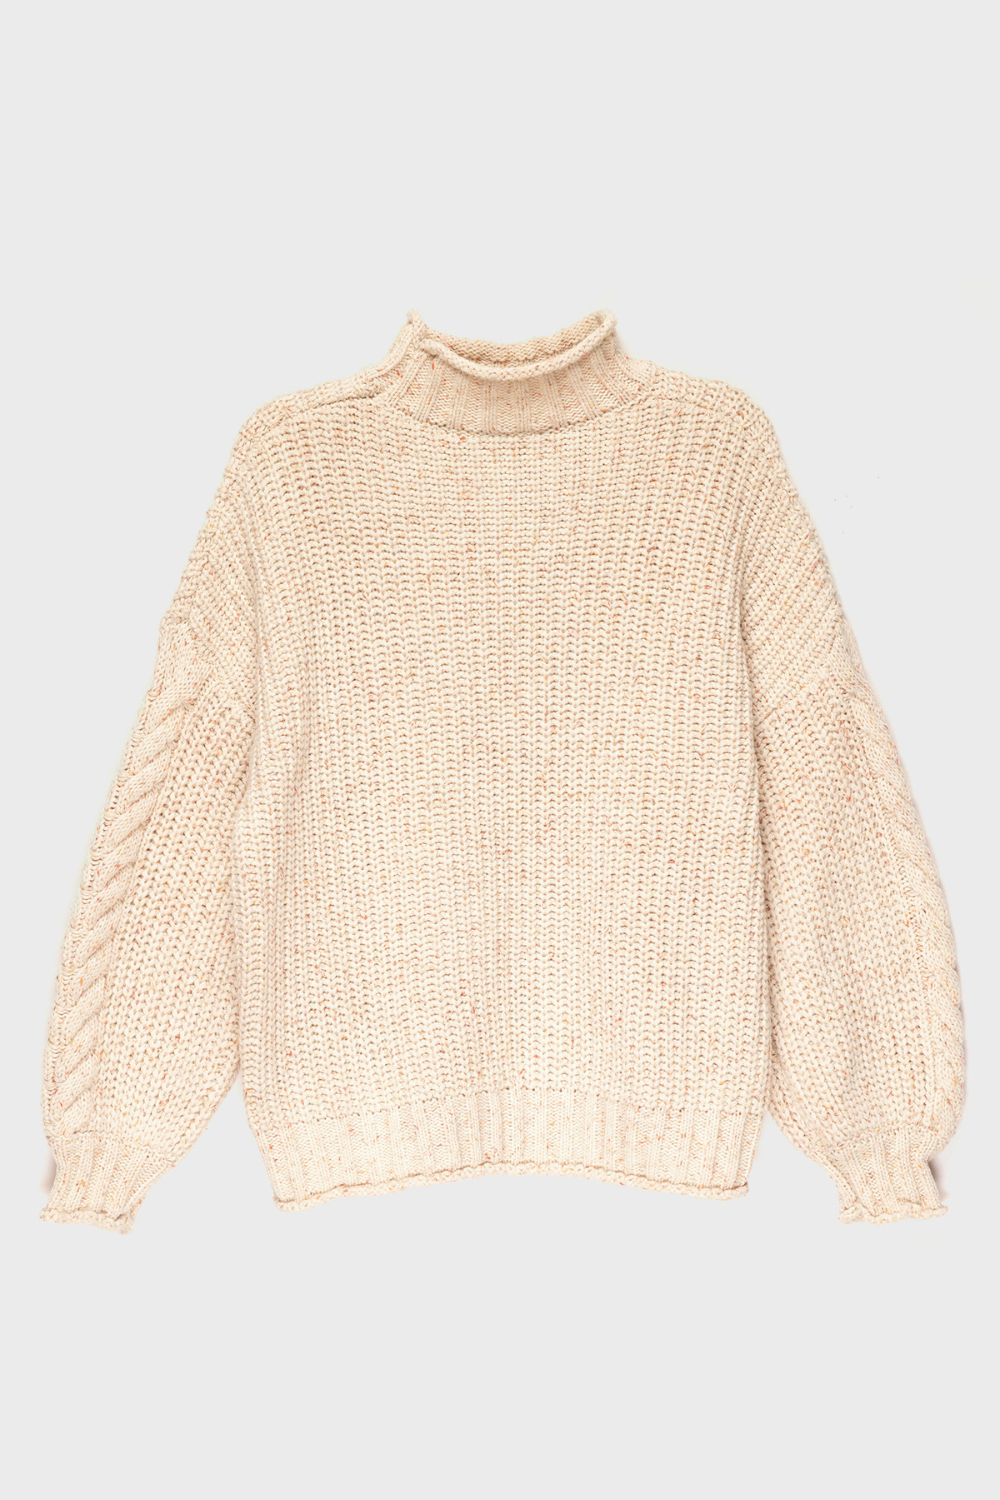 Sweater Treguaco Orgánico Beige Mujer